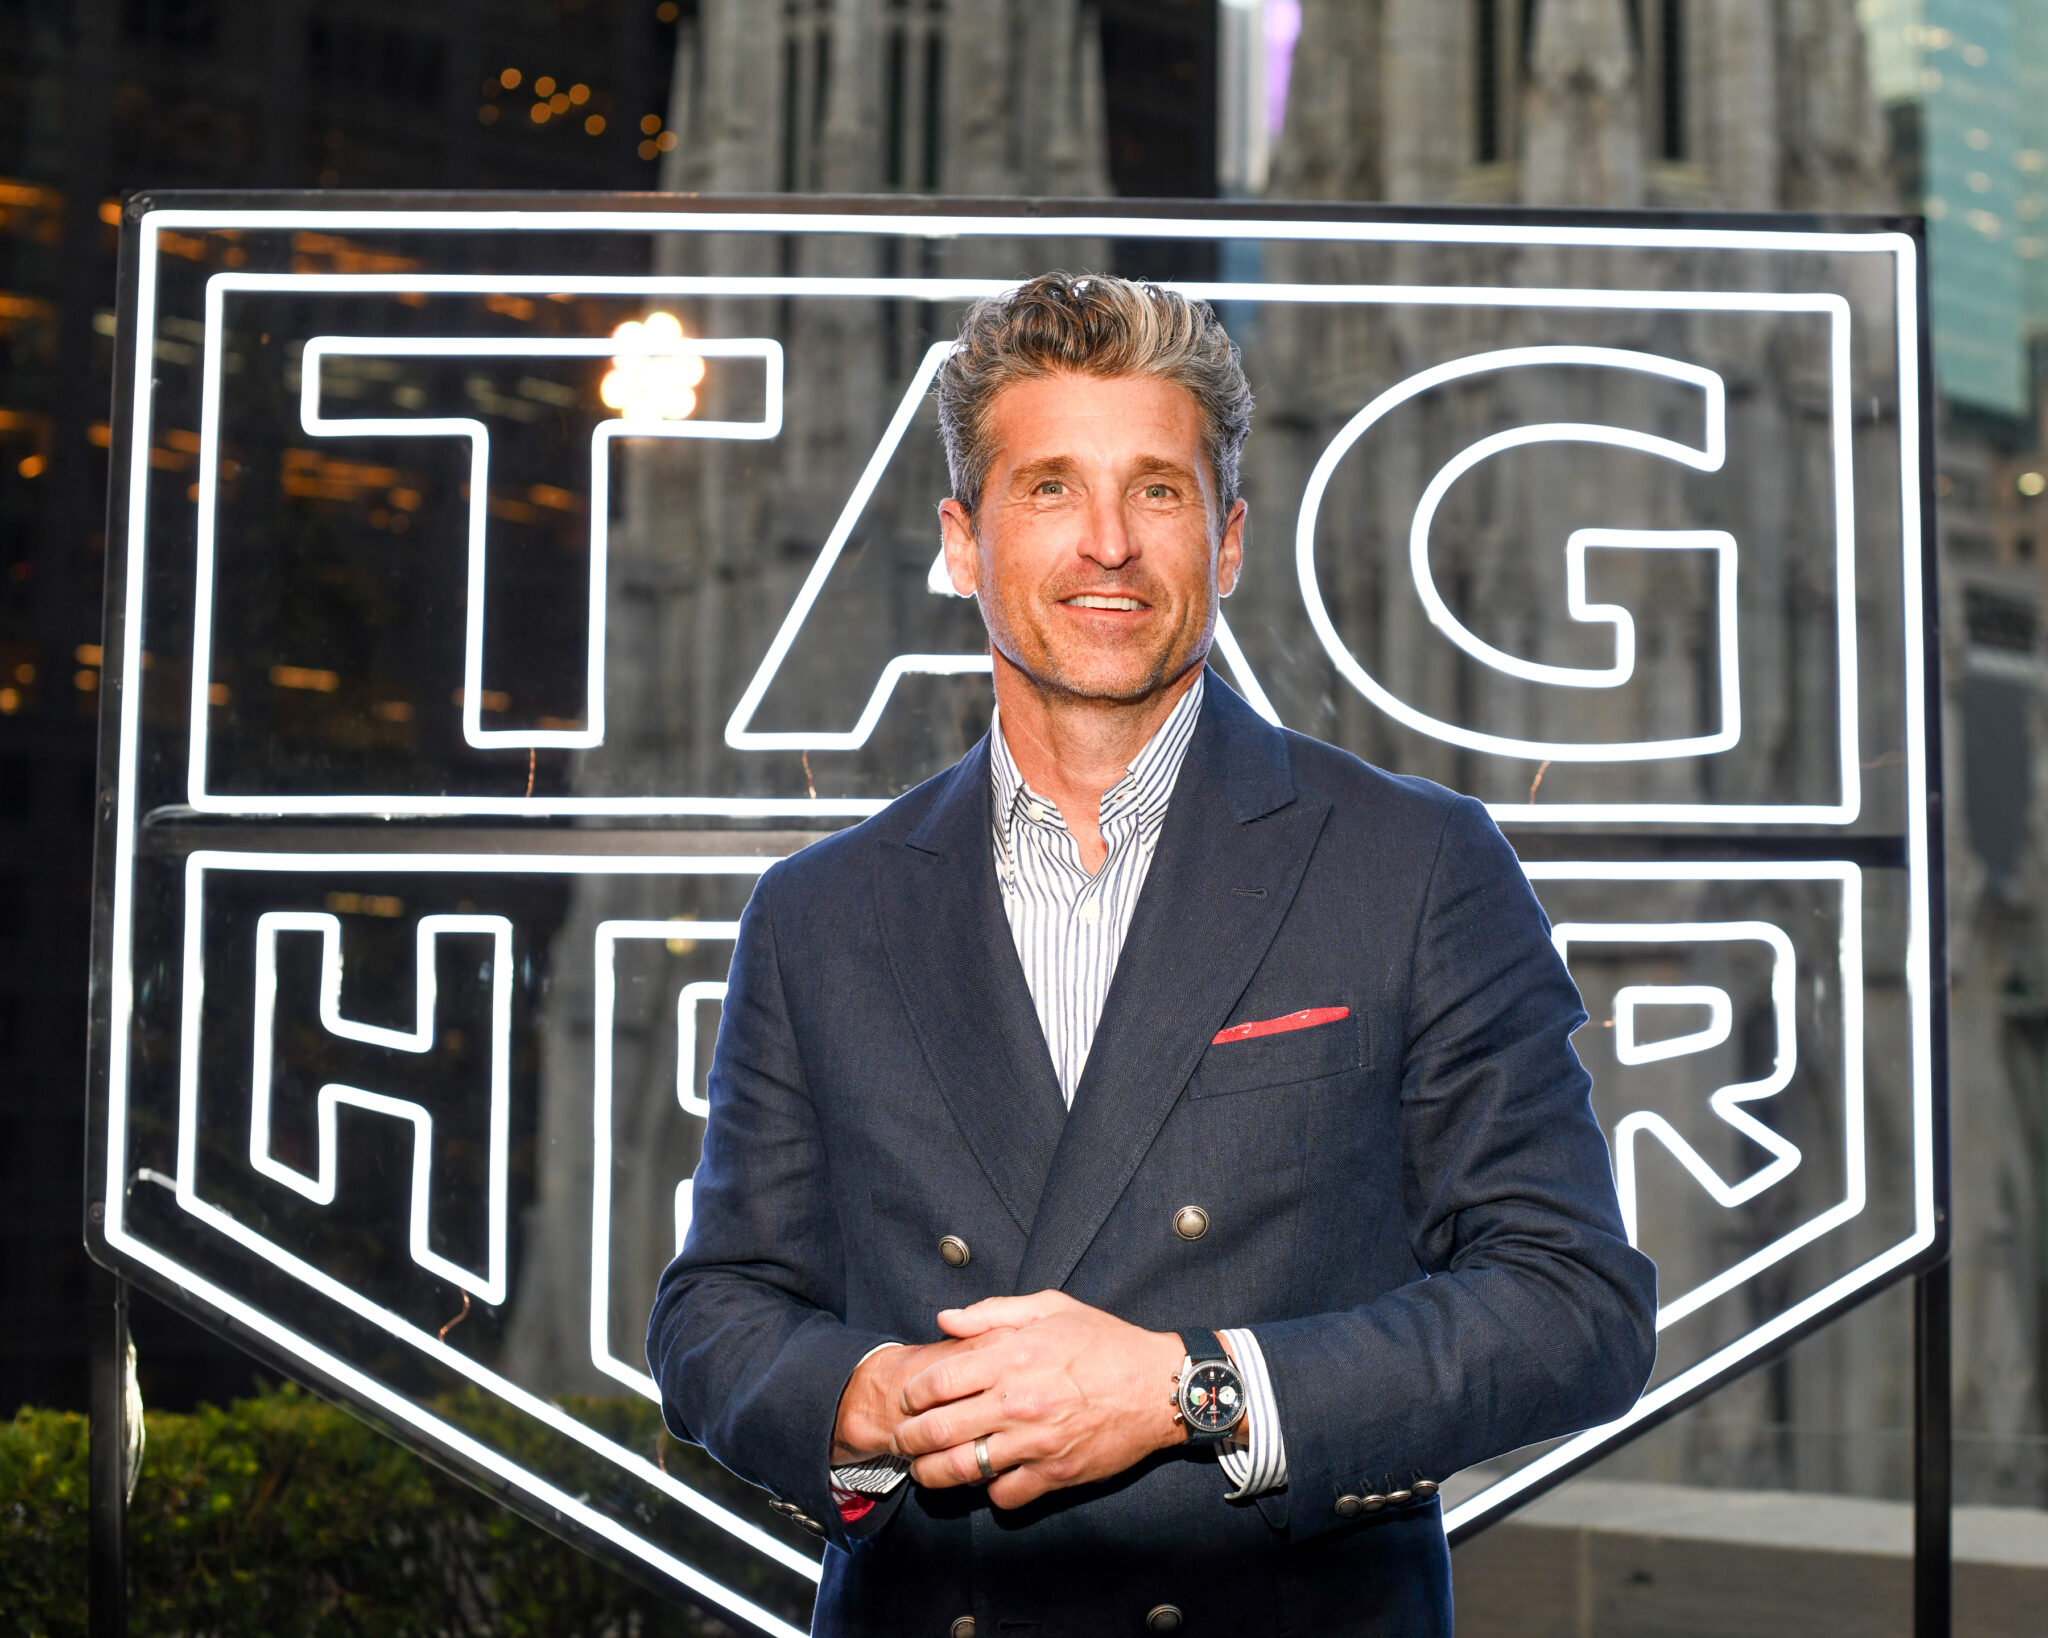 WATCH FACES: Stars turn out to celebrate opening of TAG Heuer